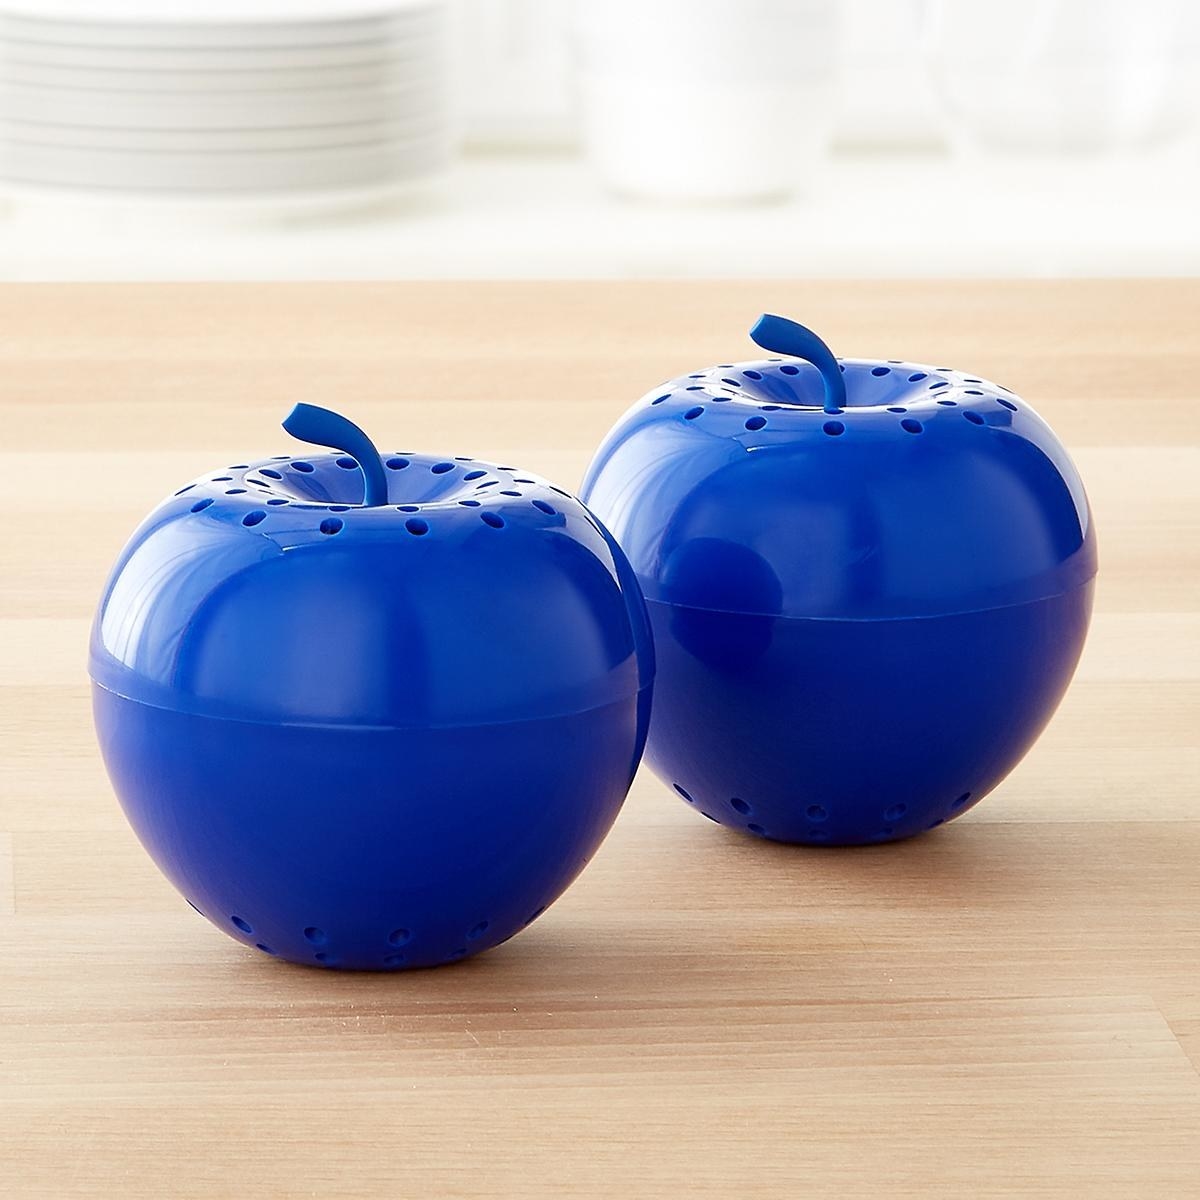 Two blue plastic apples with ventilation holes on top and on bottom